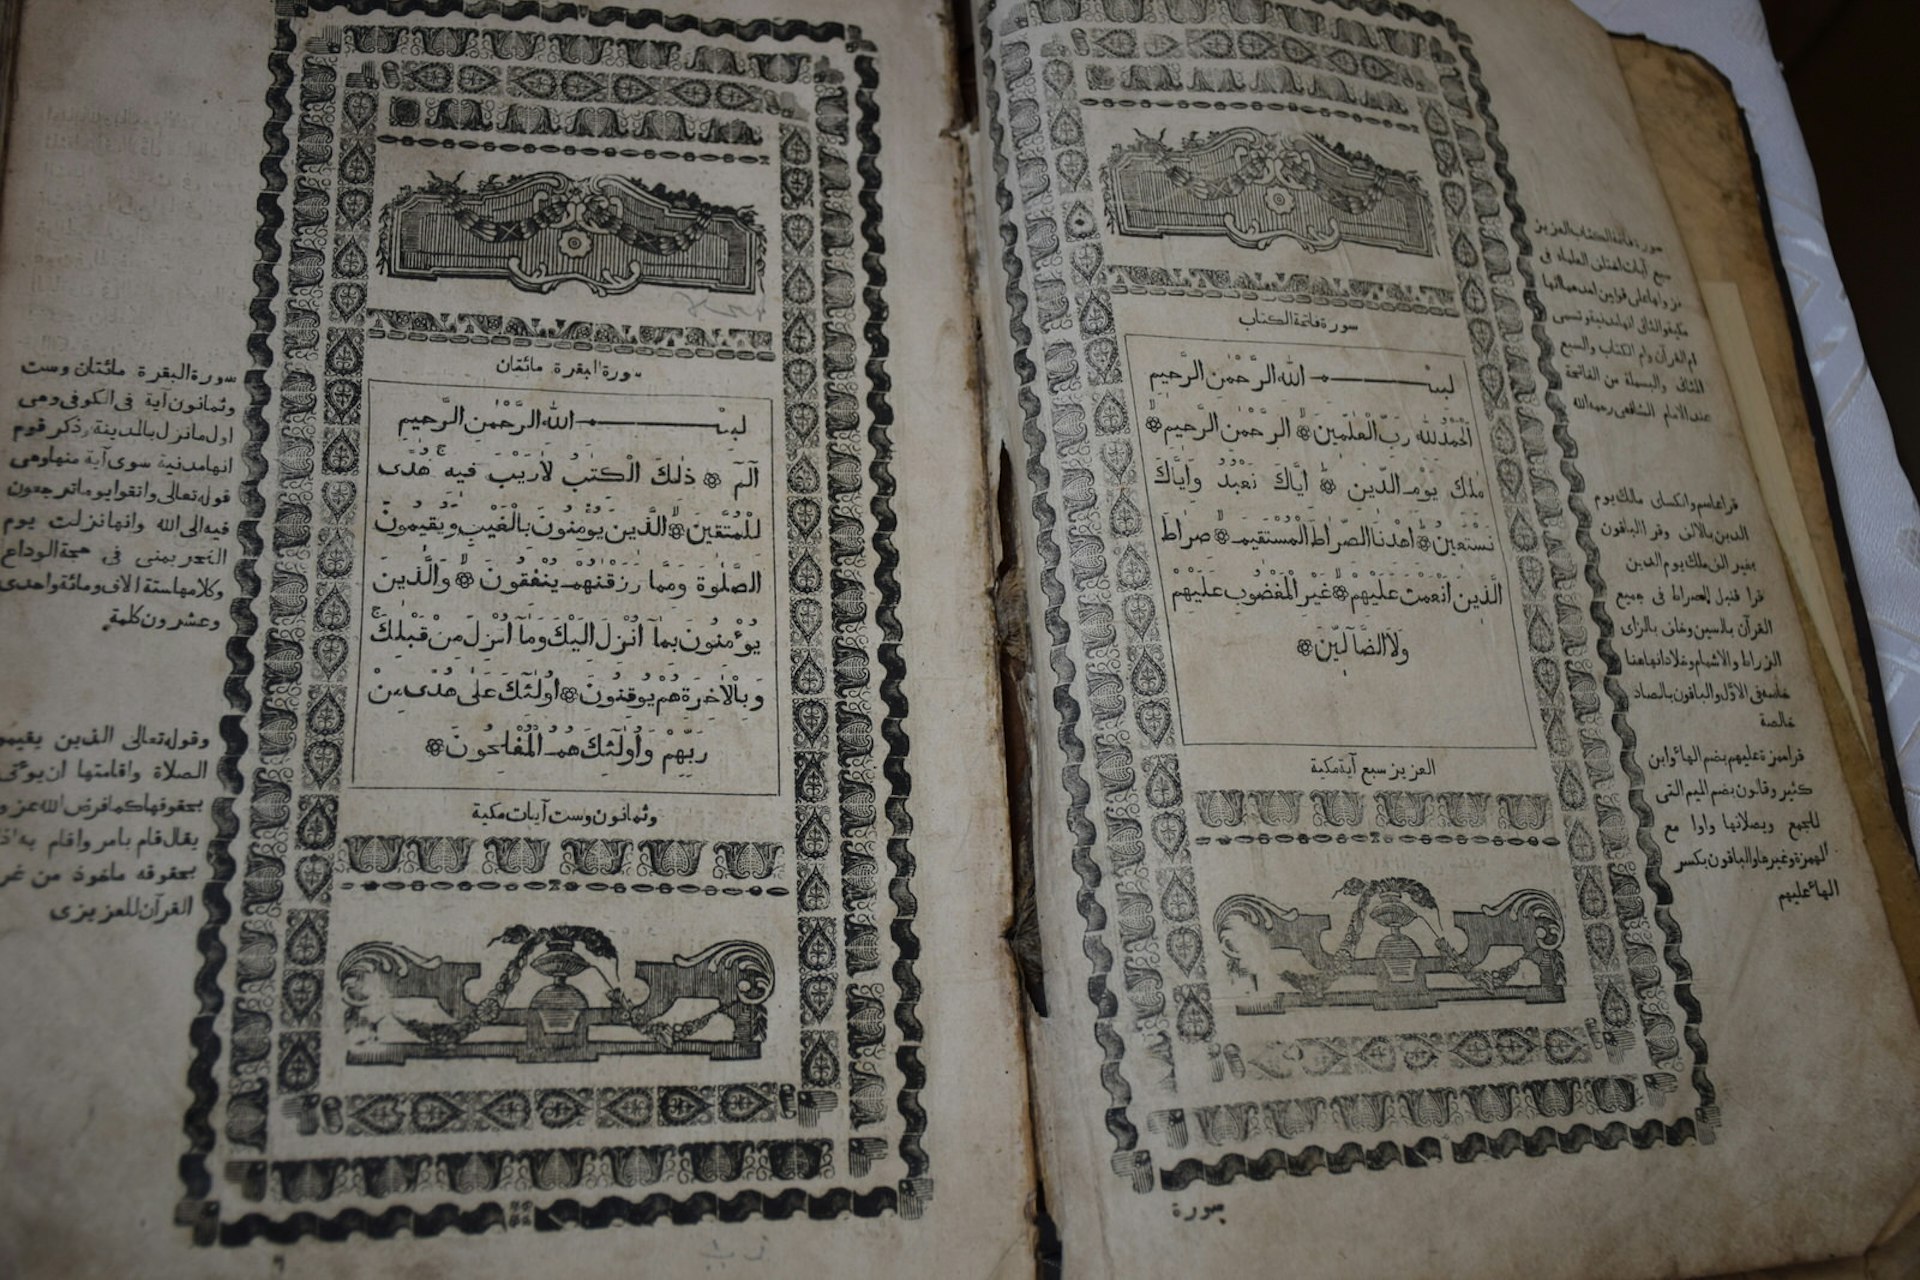 Close-up photograph of two pages of an intricately-decorated copy of the Quran